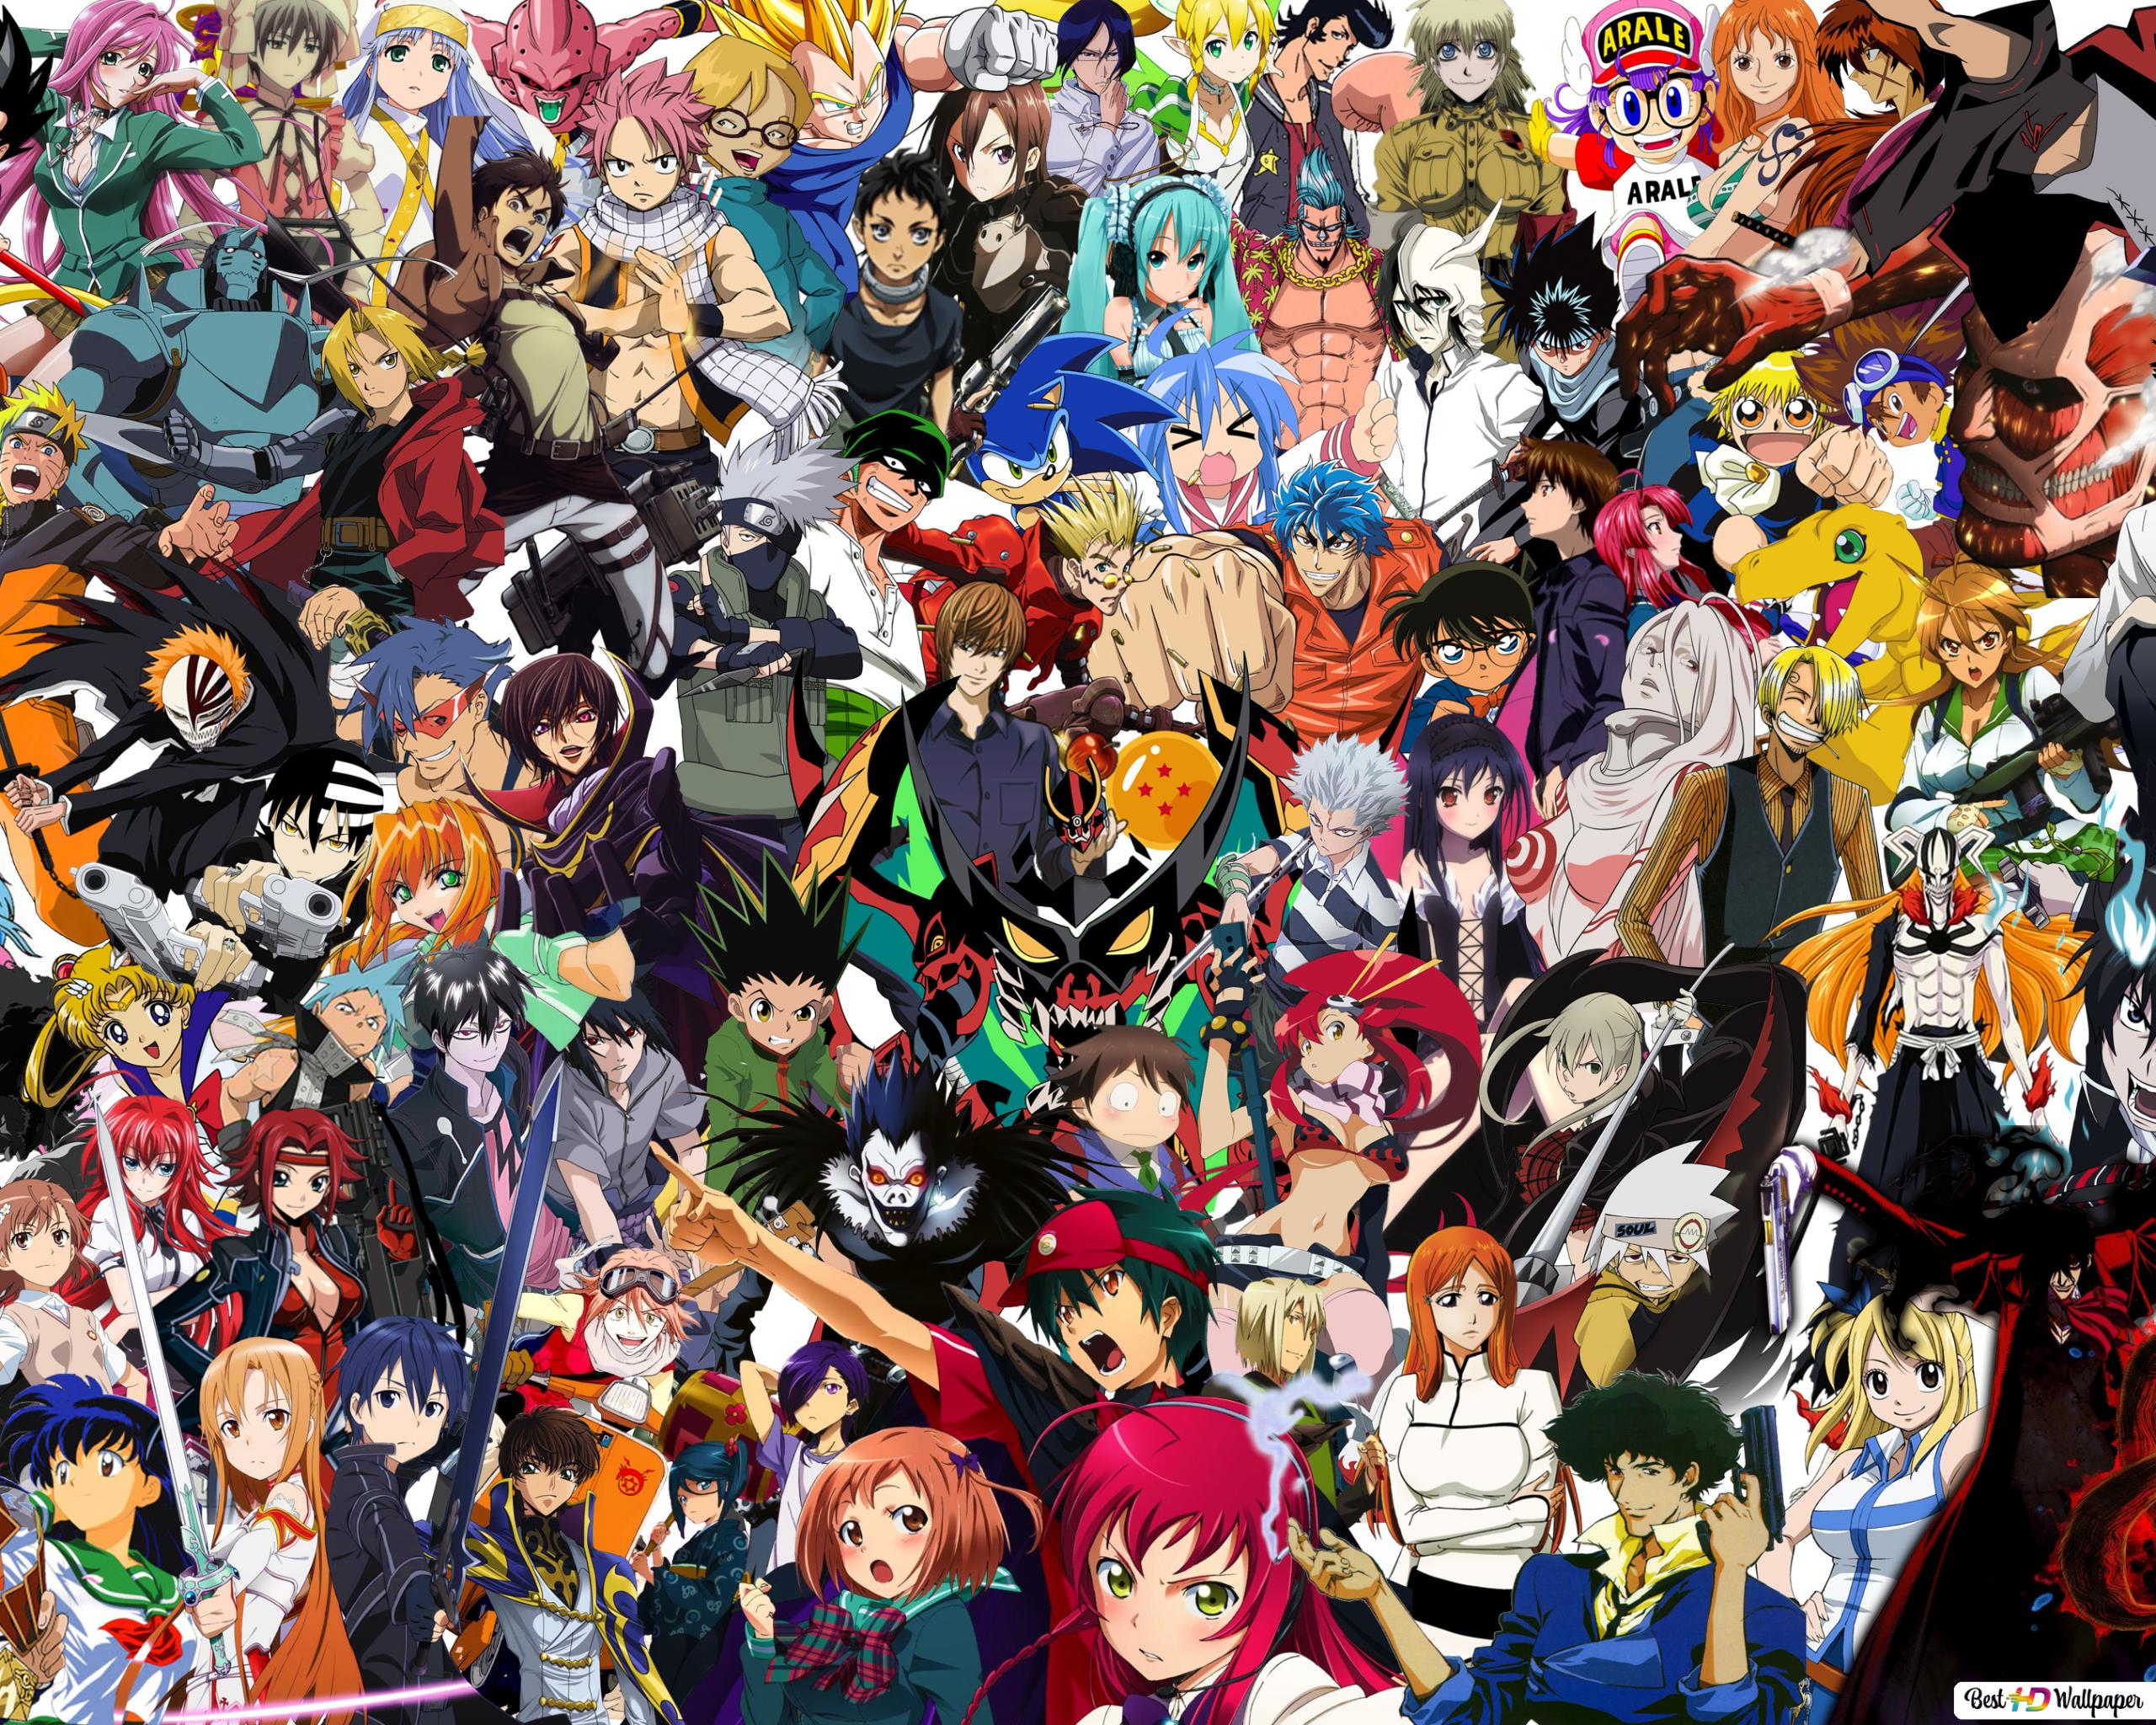 Anime Characters all in 24x14 inch wall Poster with Tracking Number